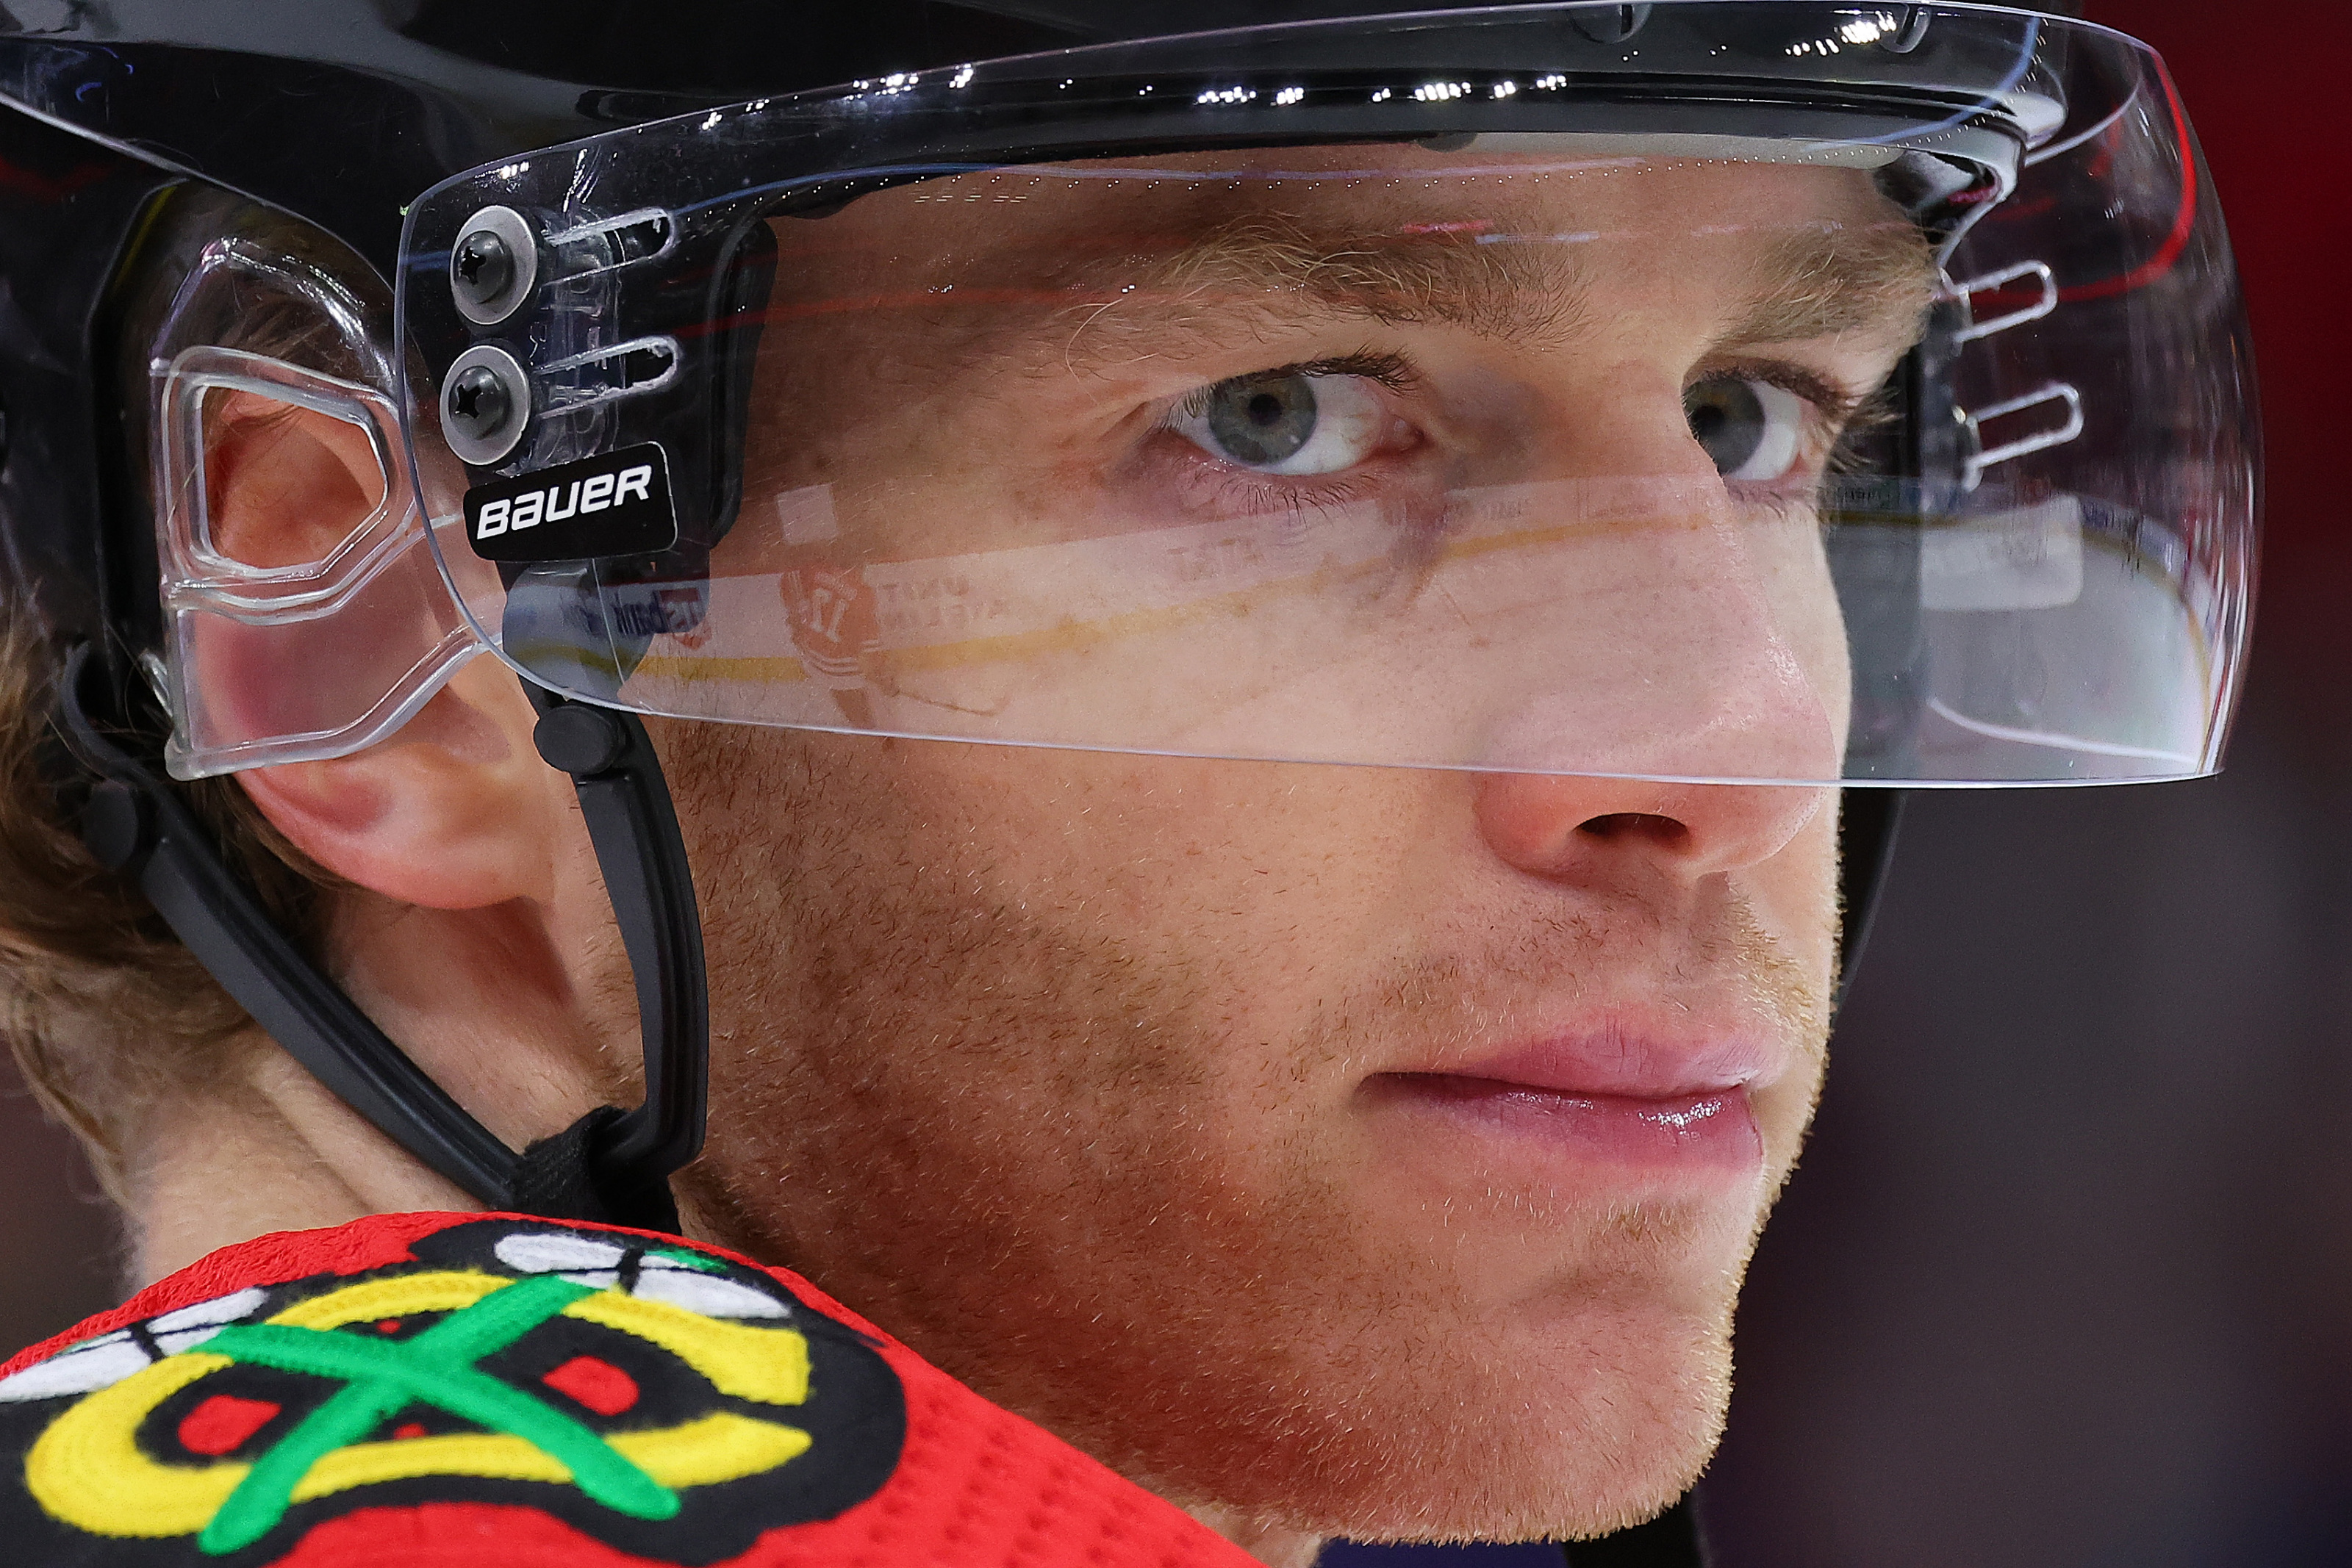 Rangers trading for Patrick Kane as Stanley Cup hopes intensify